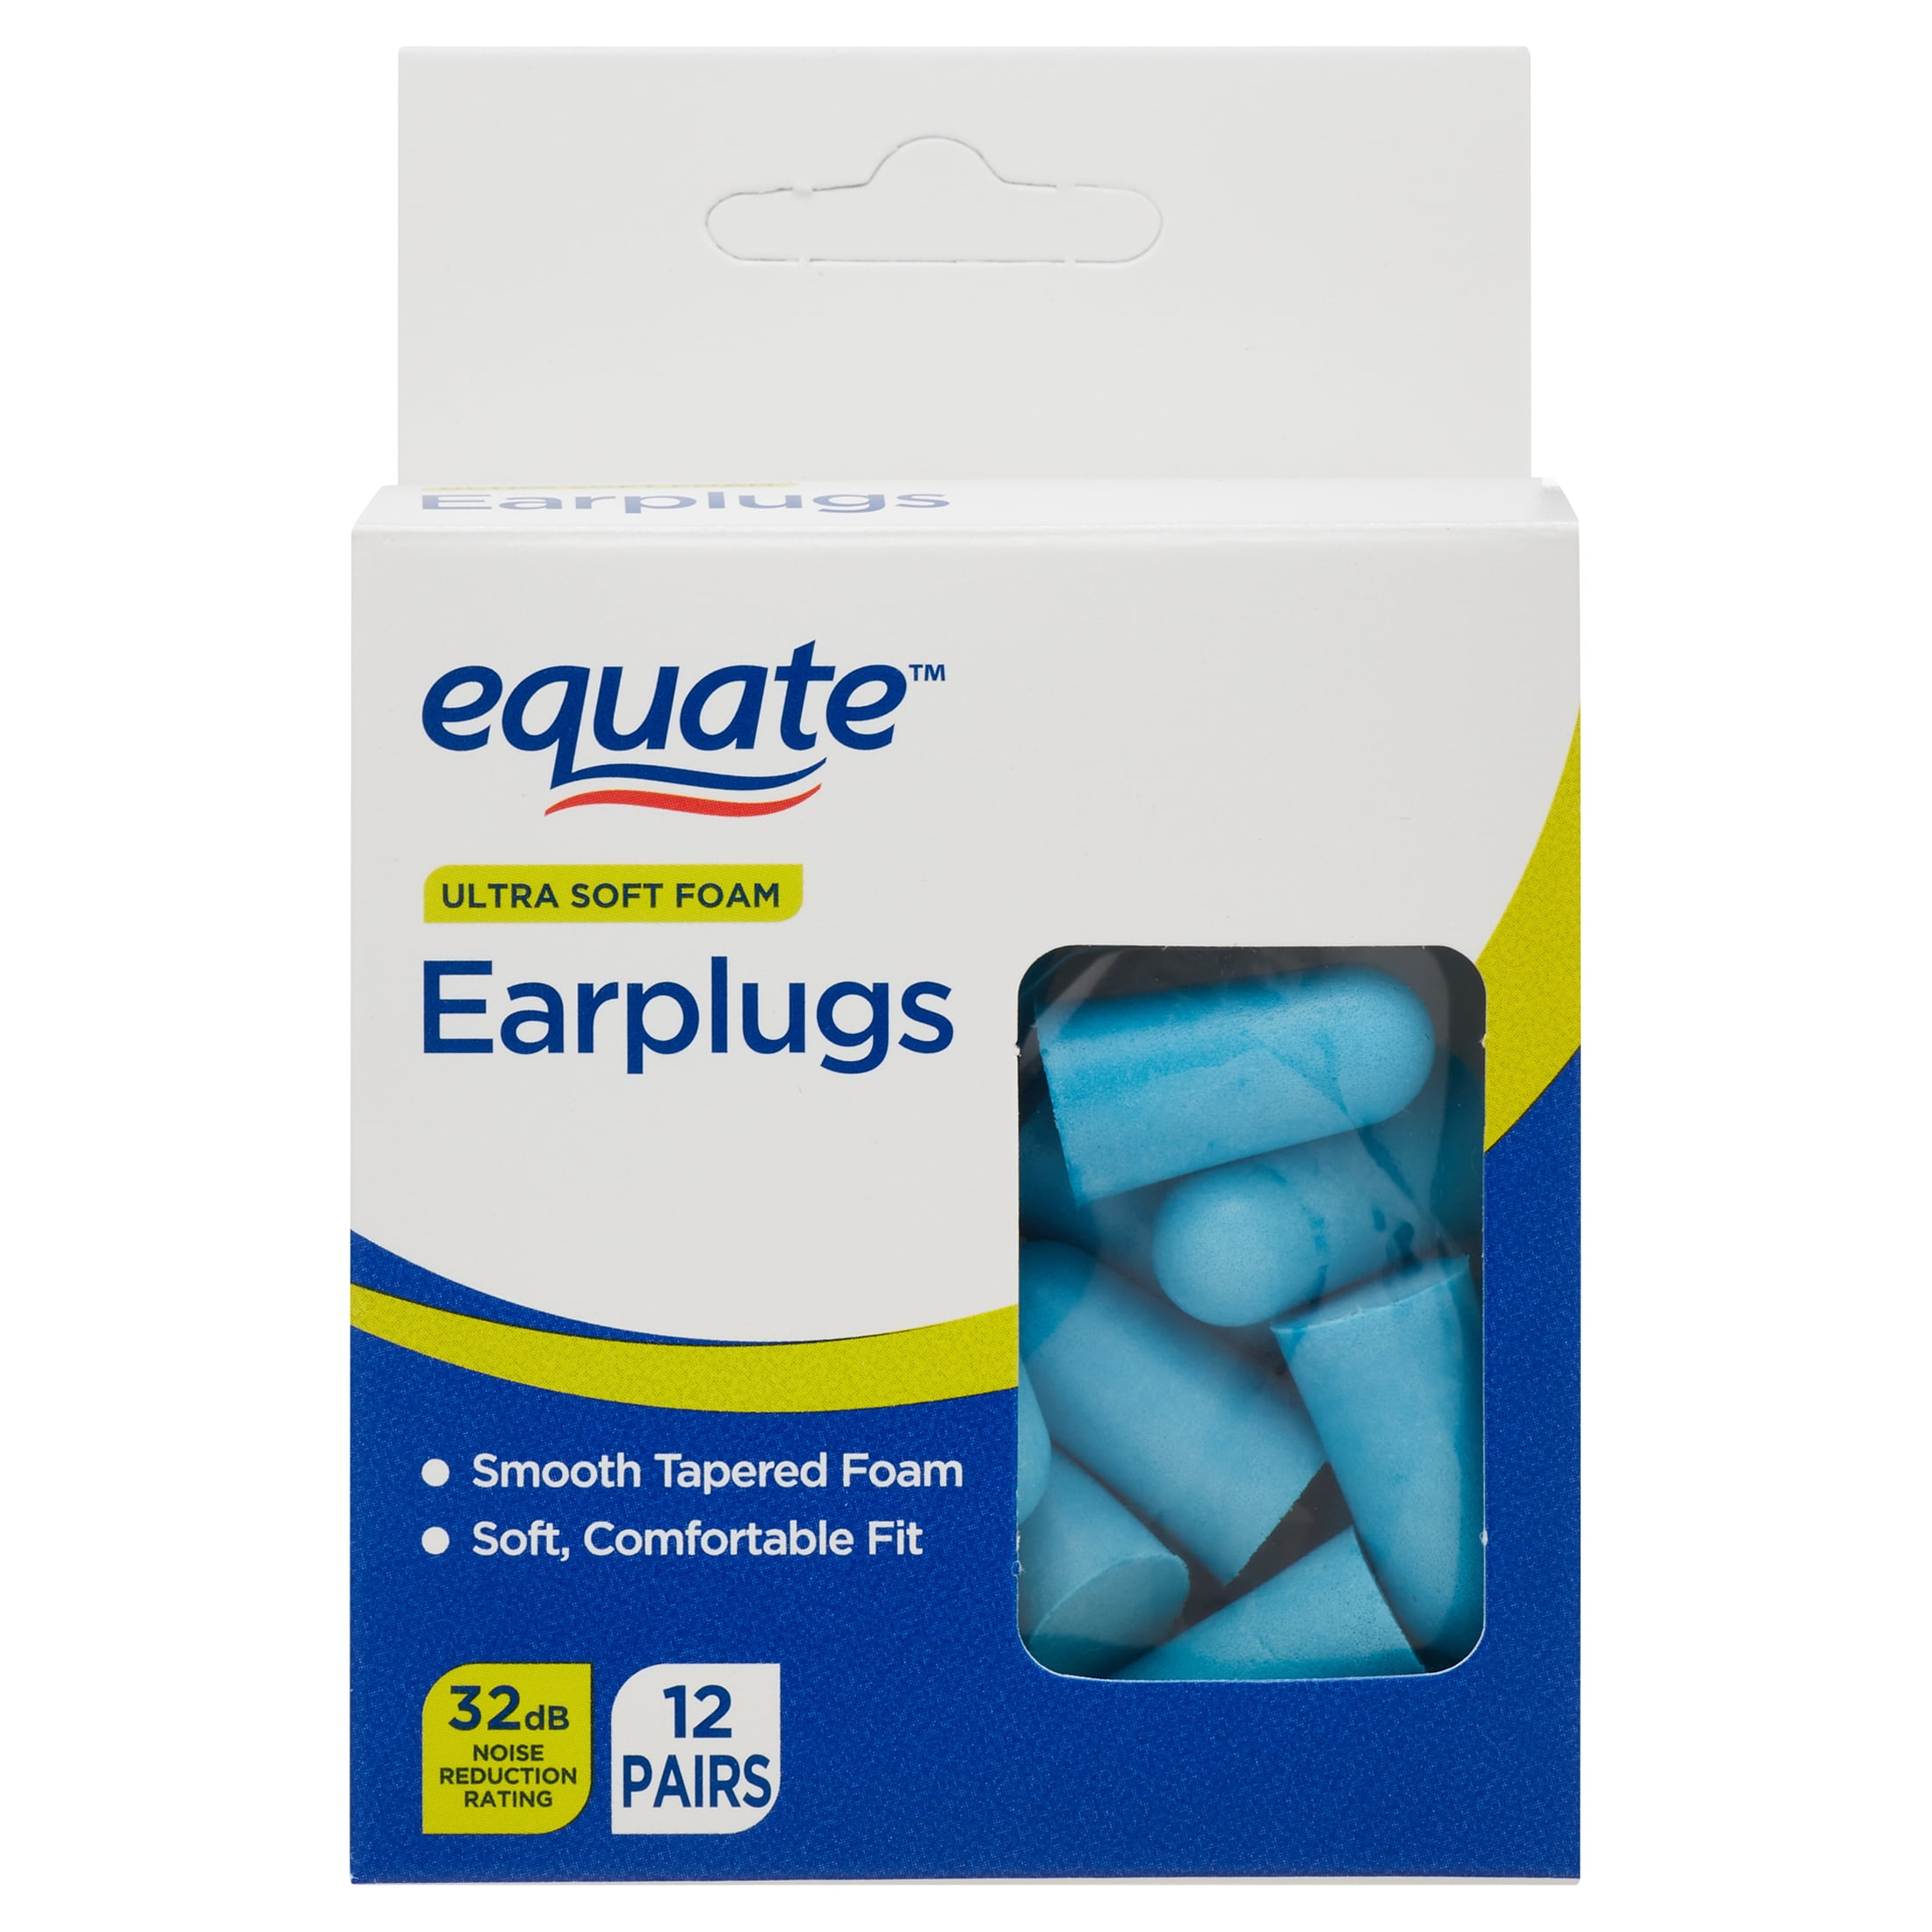 YESEAR NS4000 Ultimate comfort Soft Silicone Ear plugs White, Set of 2 